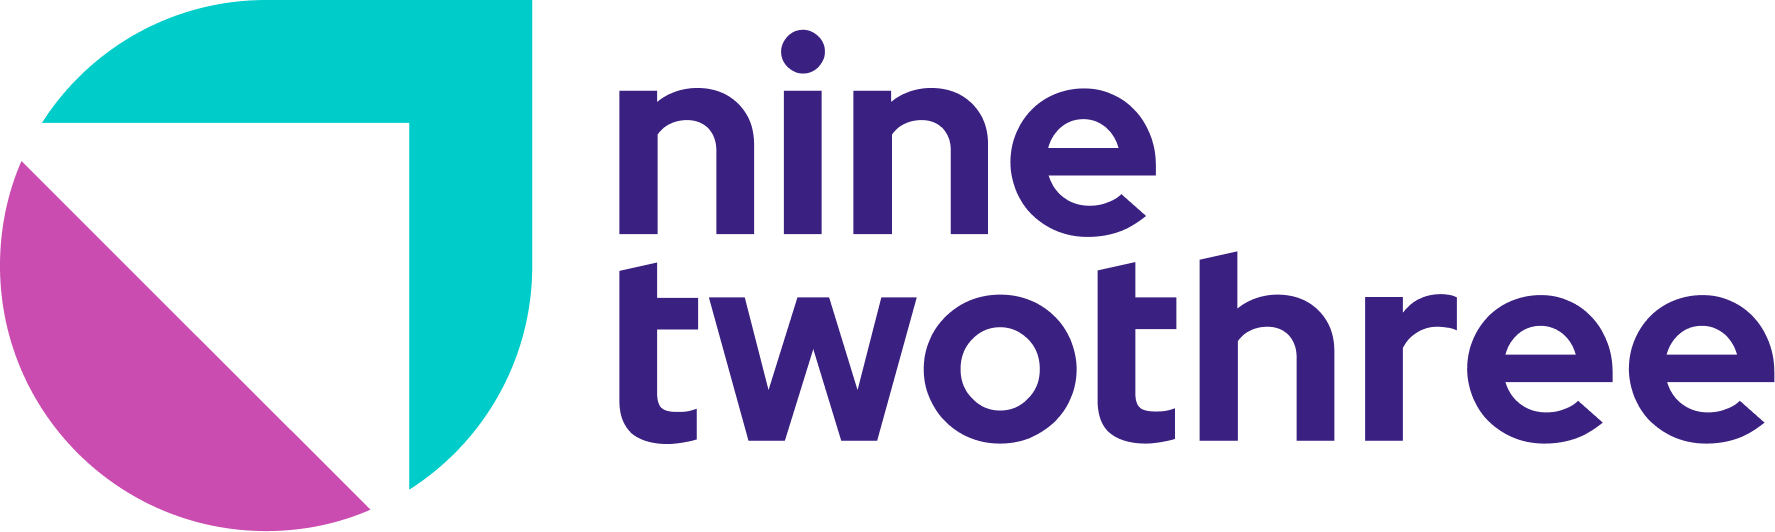 NineTwoThree Digital Ventures is an innovative team of web and mobile application product designers and software engineers.